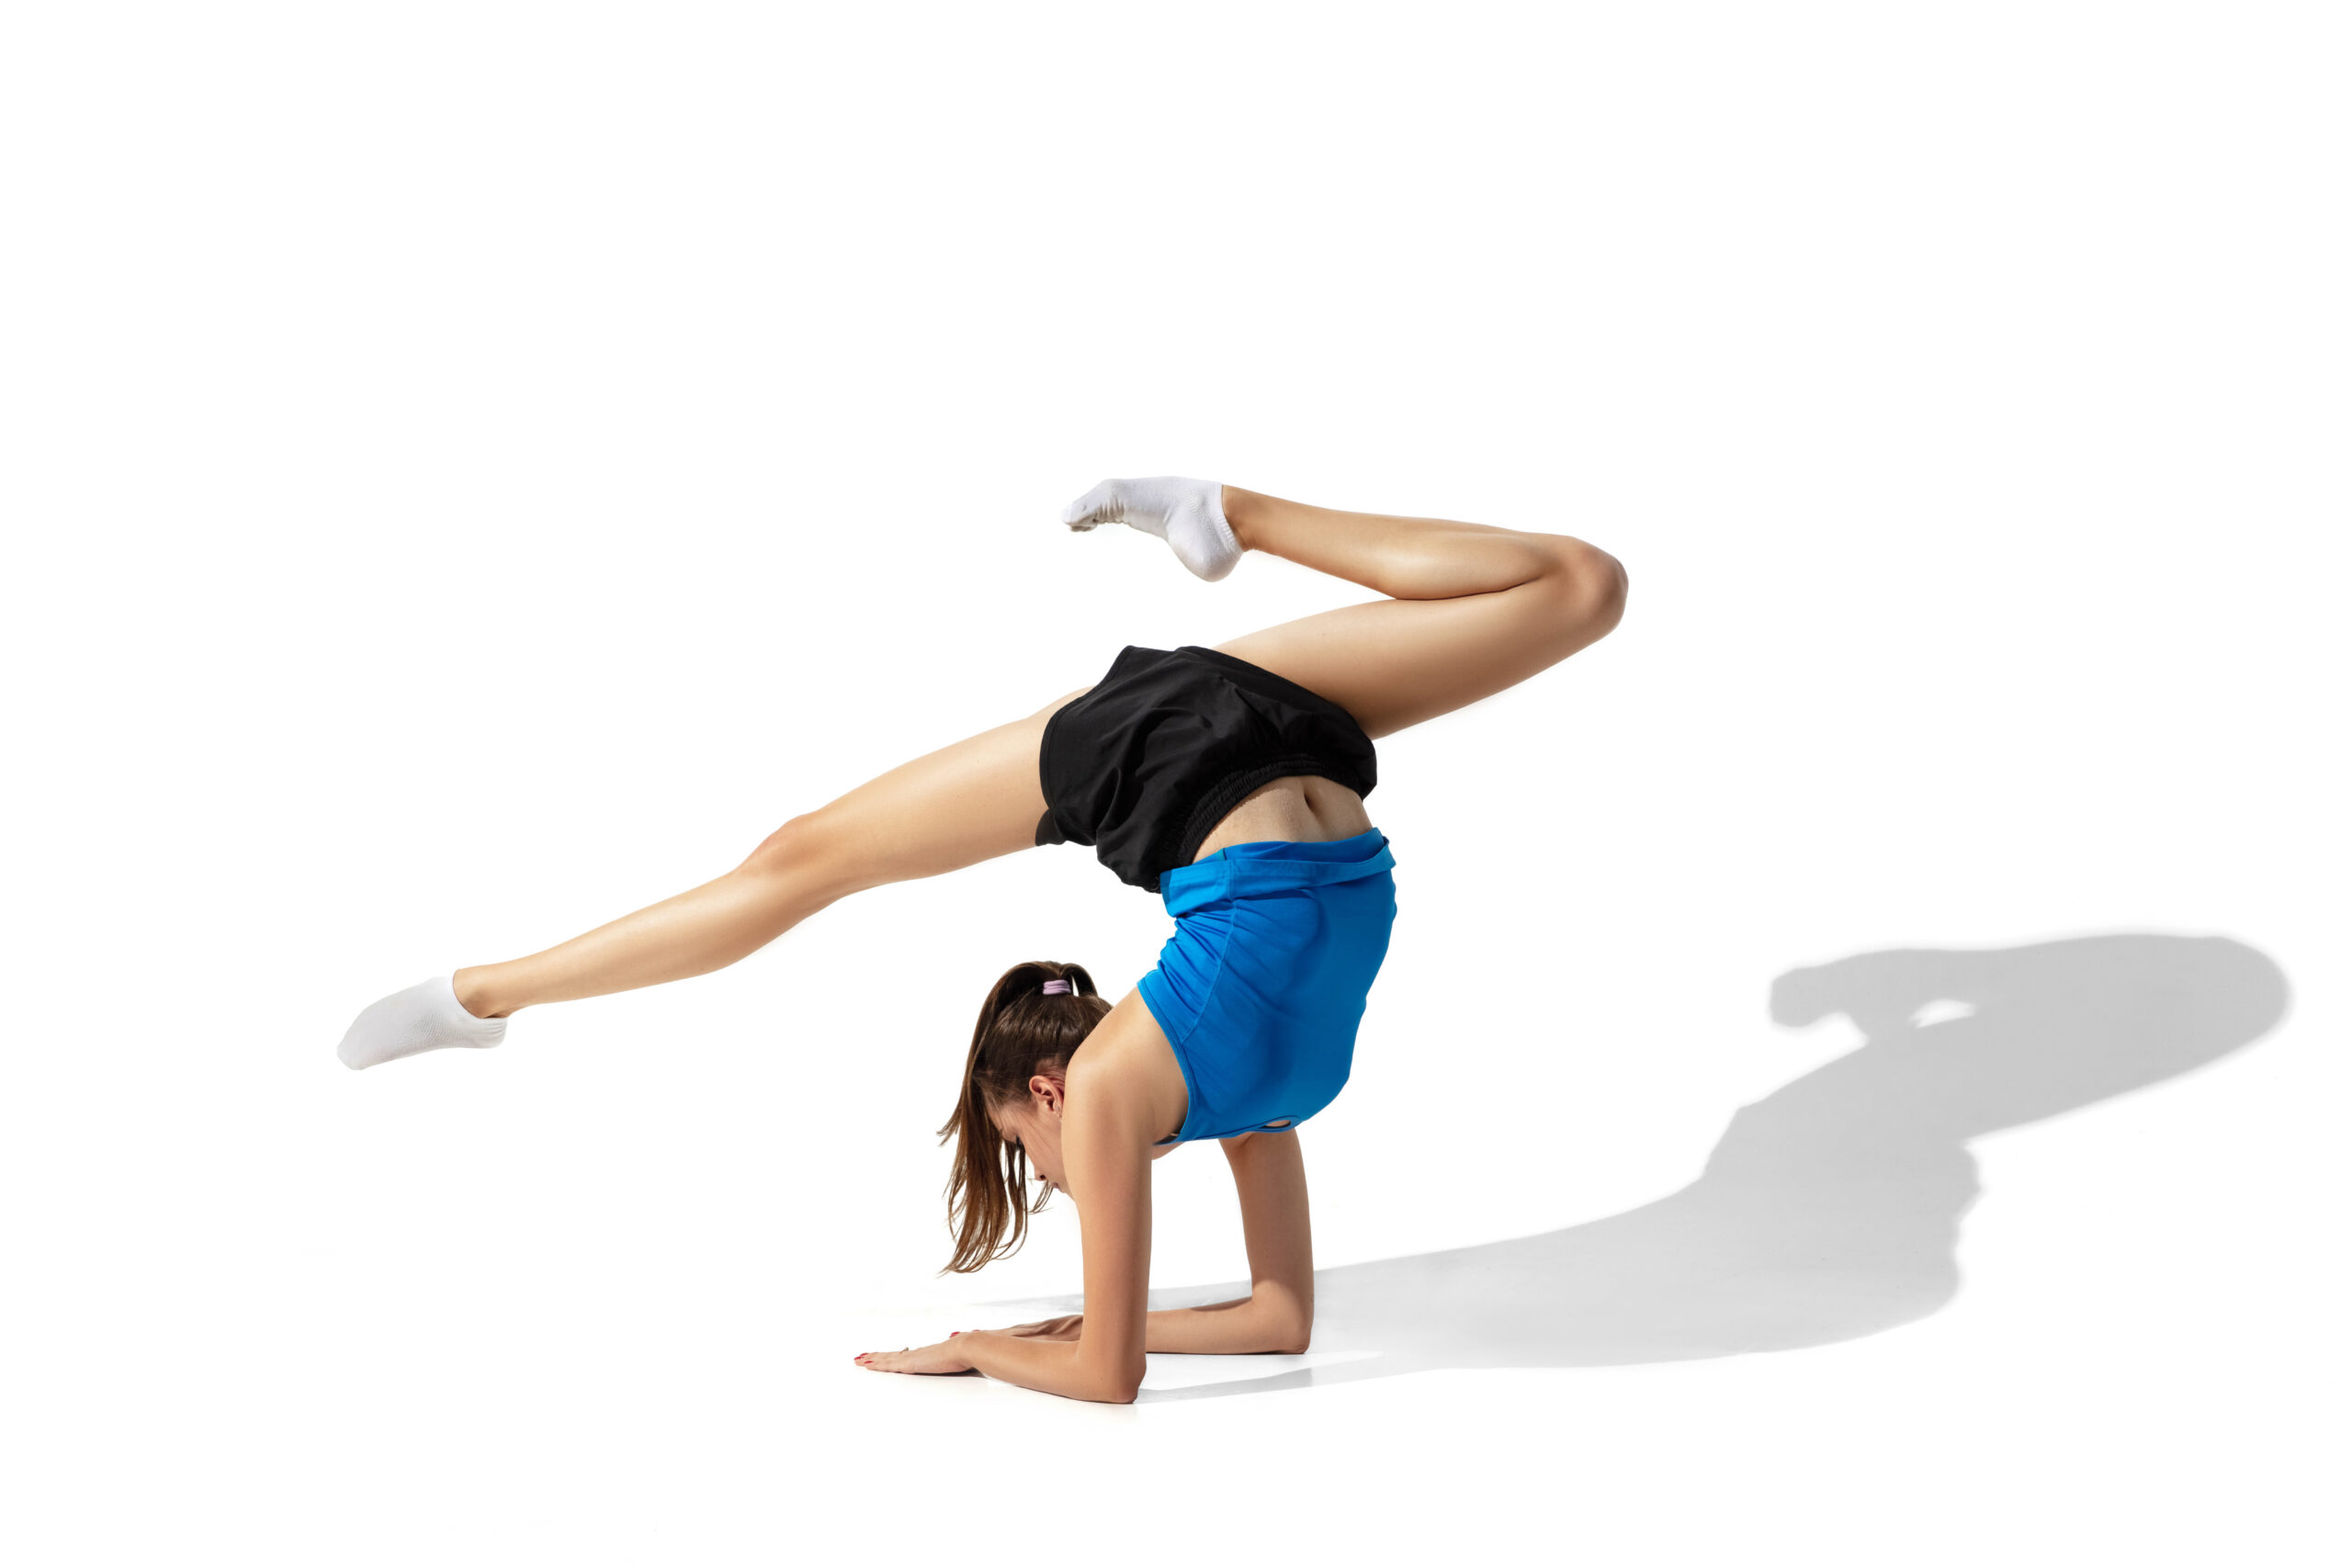 Beautiful young female athlete stretching on white studio background with shadows